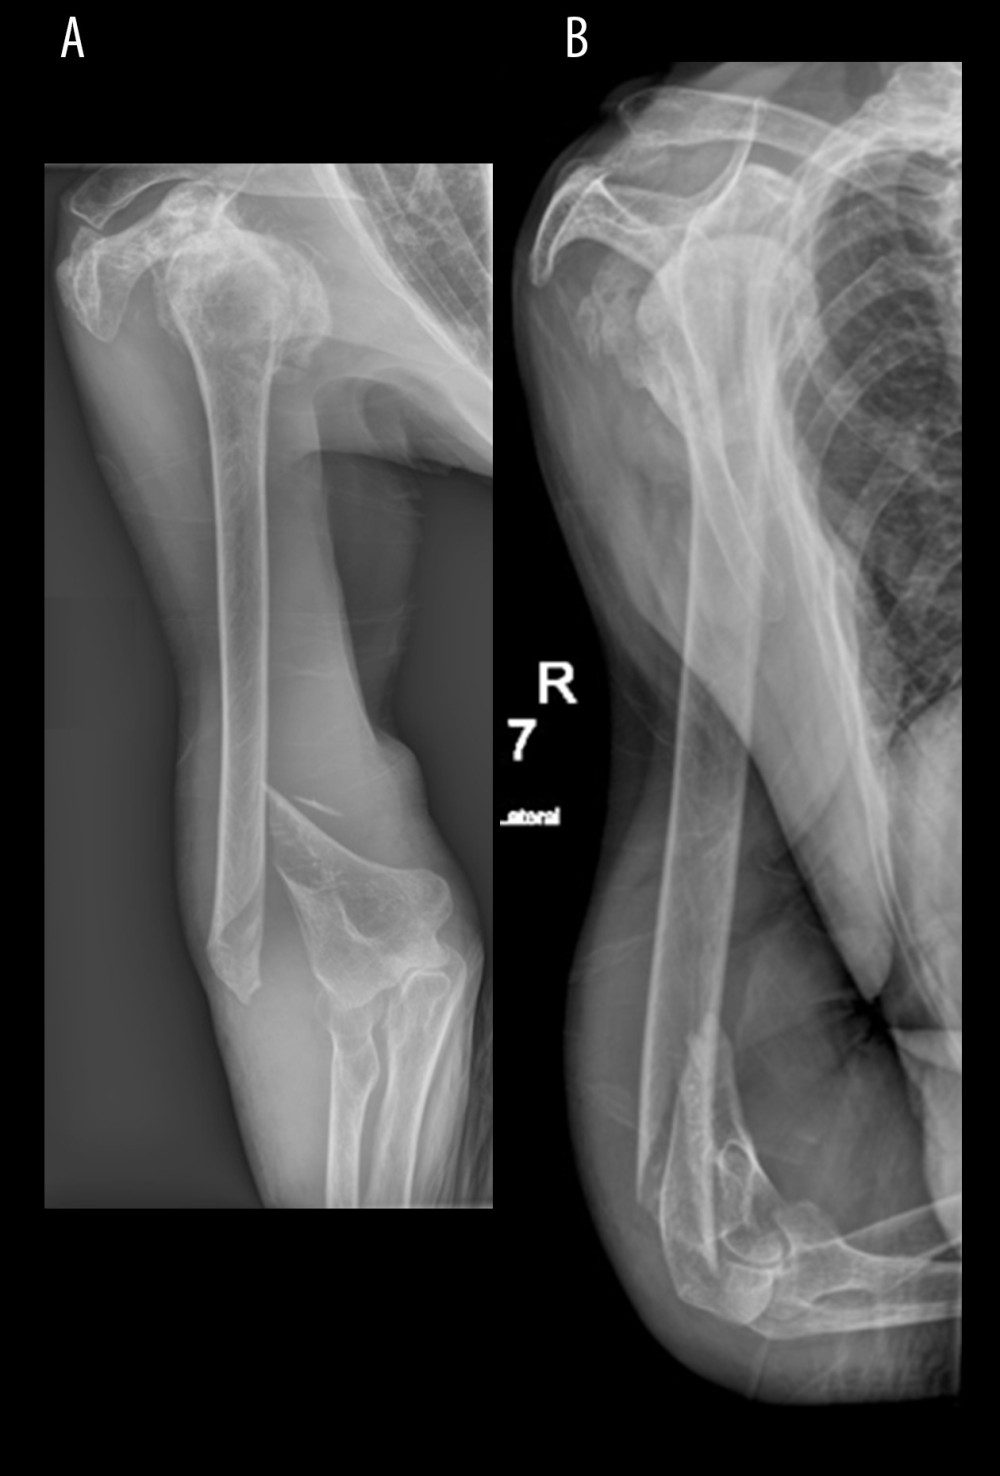 Anterior-posterior (A) and lateral (B) radiographs taken on initial presentation to hospital.